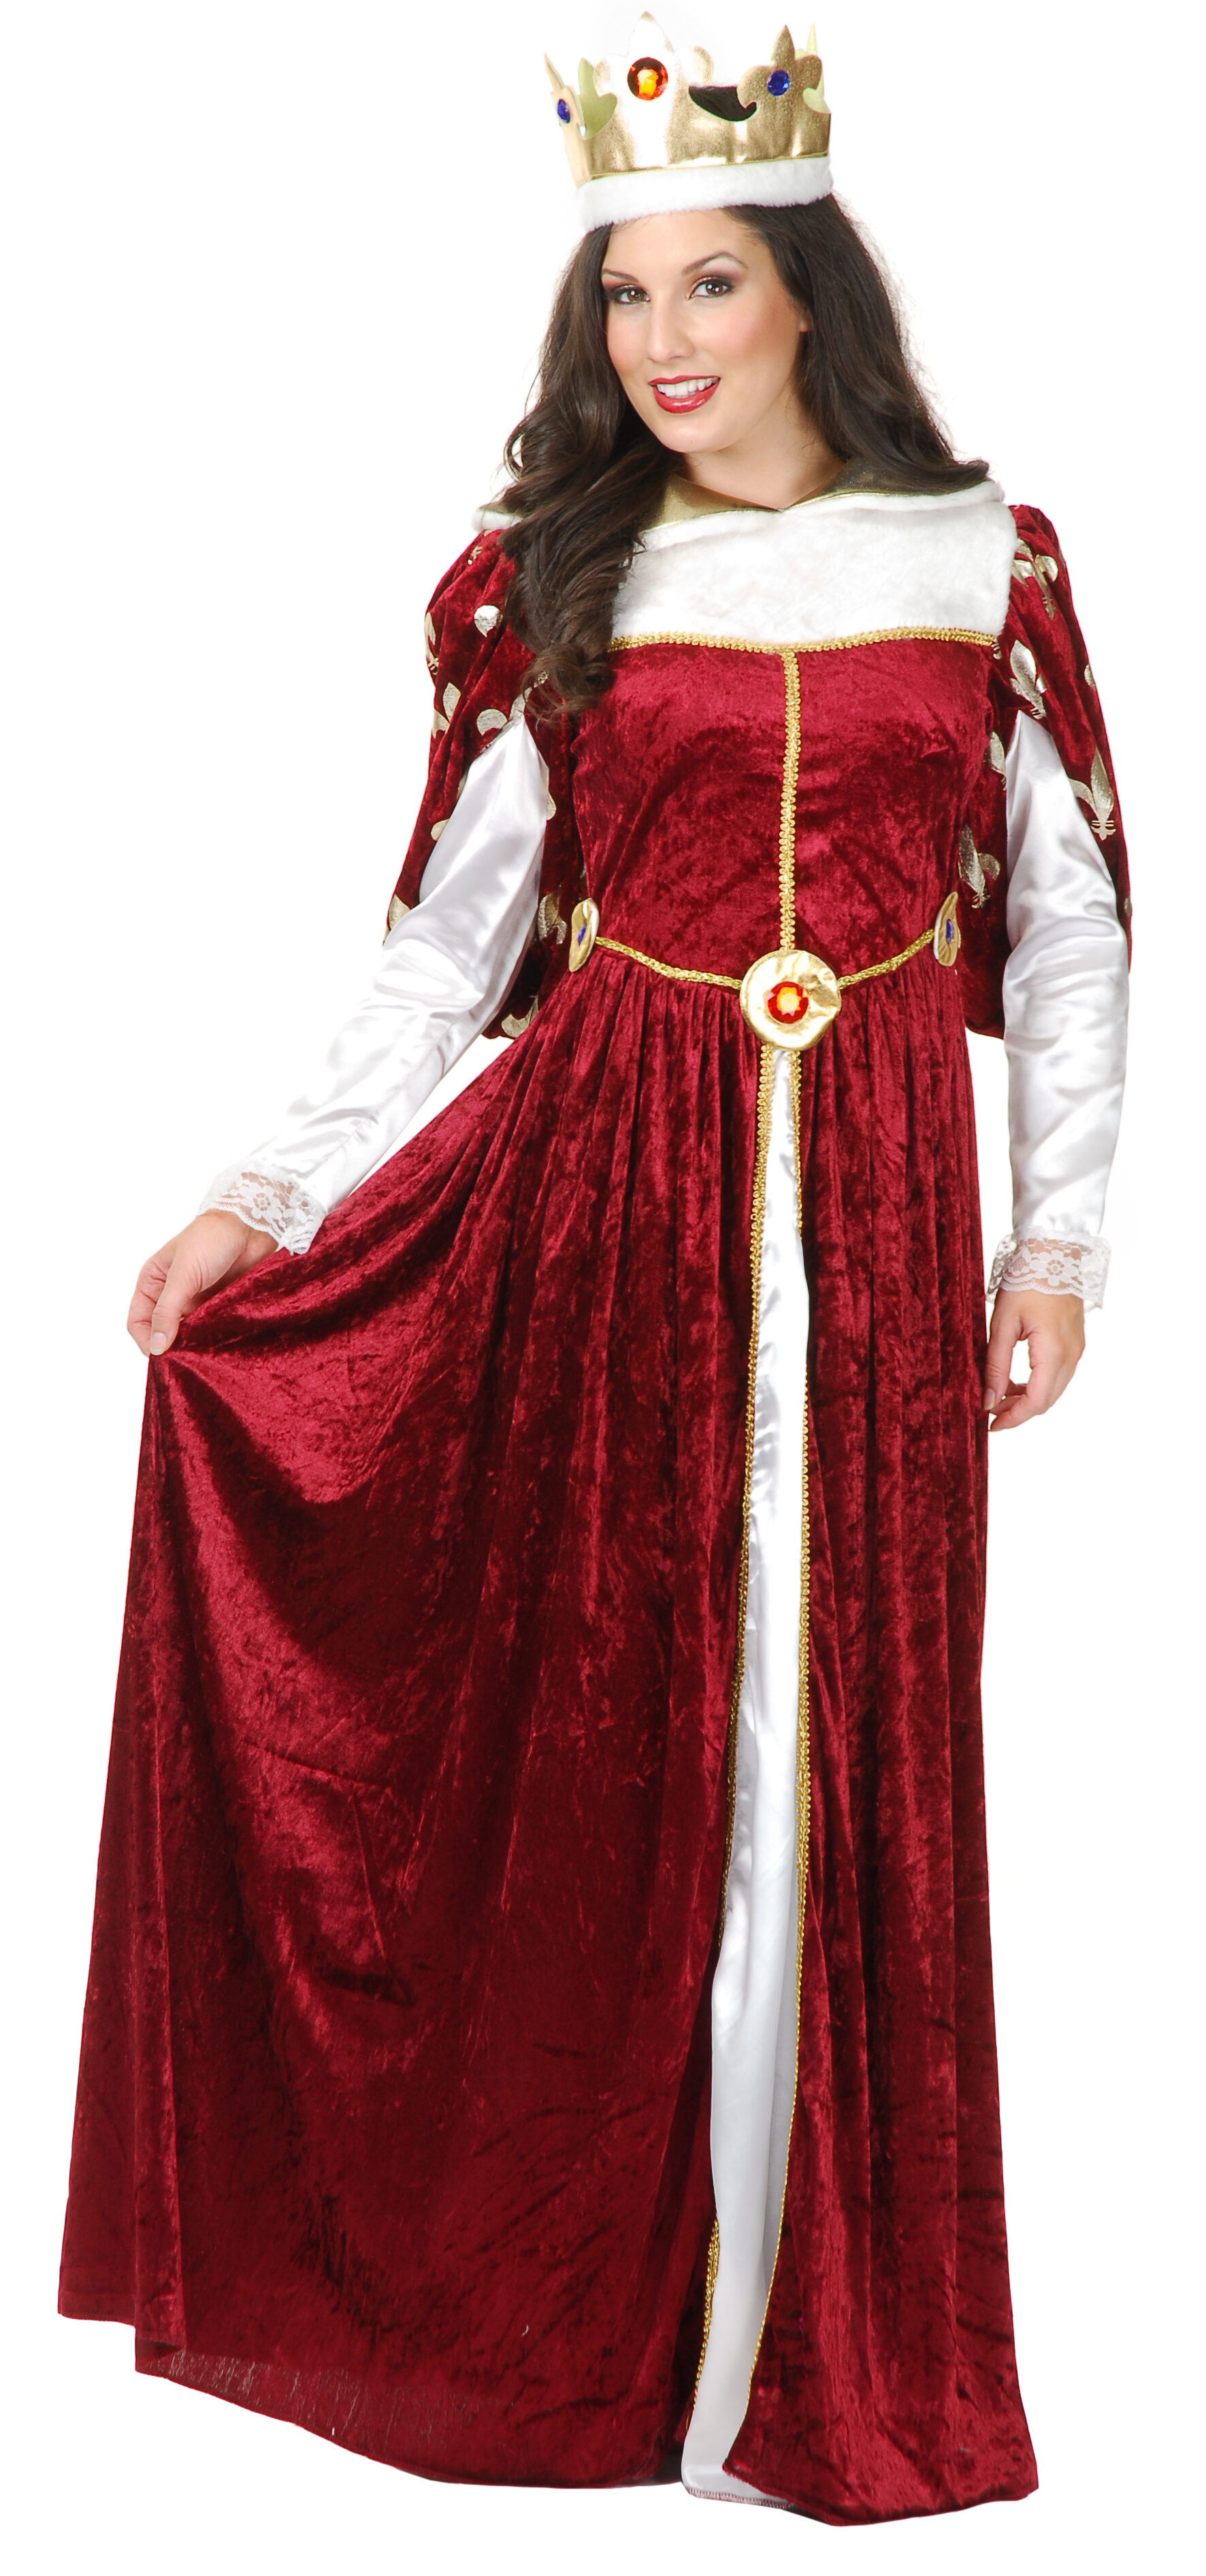 womens-royal-queen-gown-adult-costume-mr-costumes